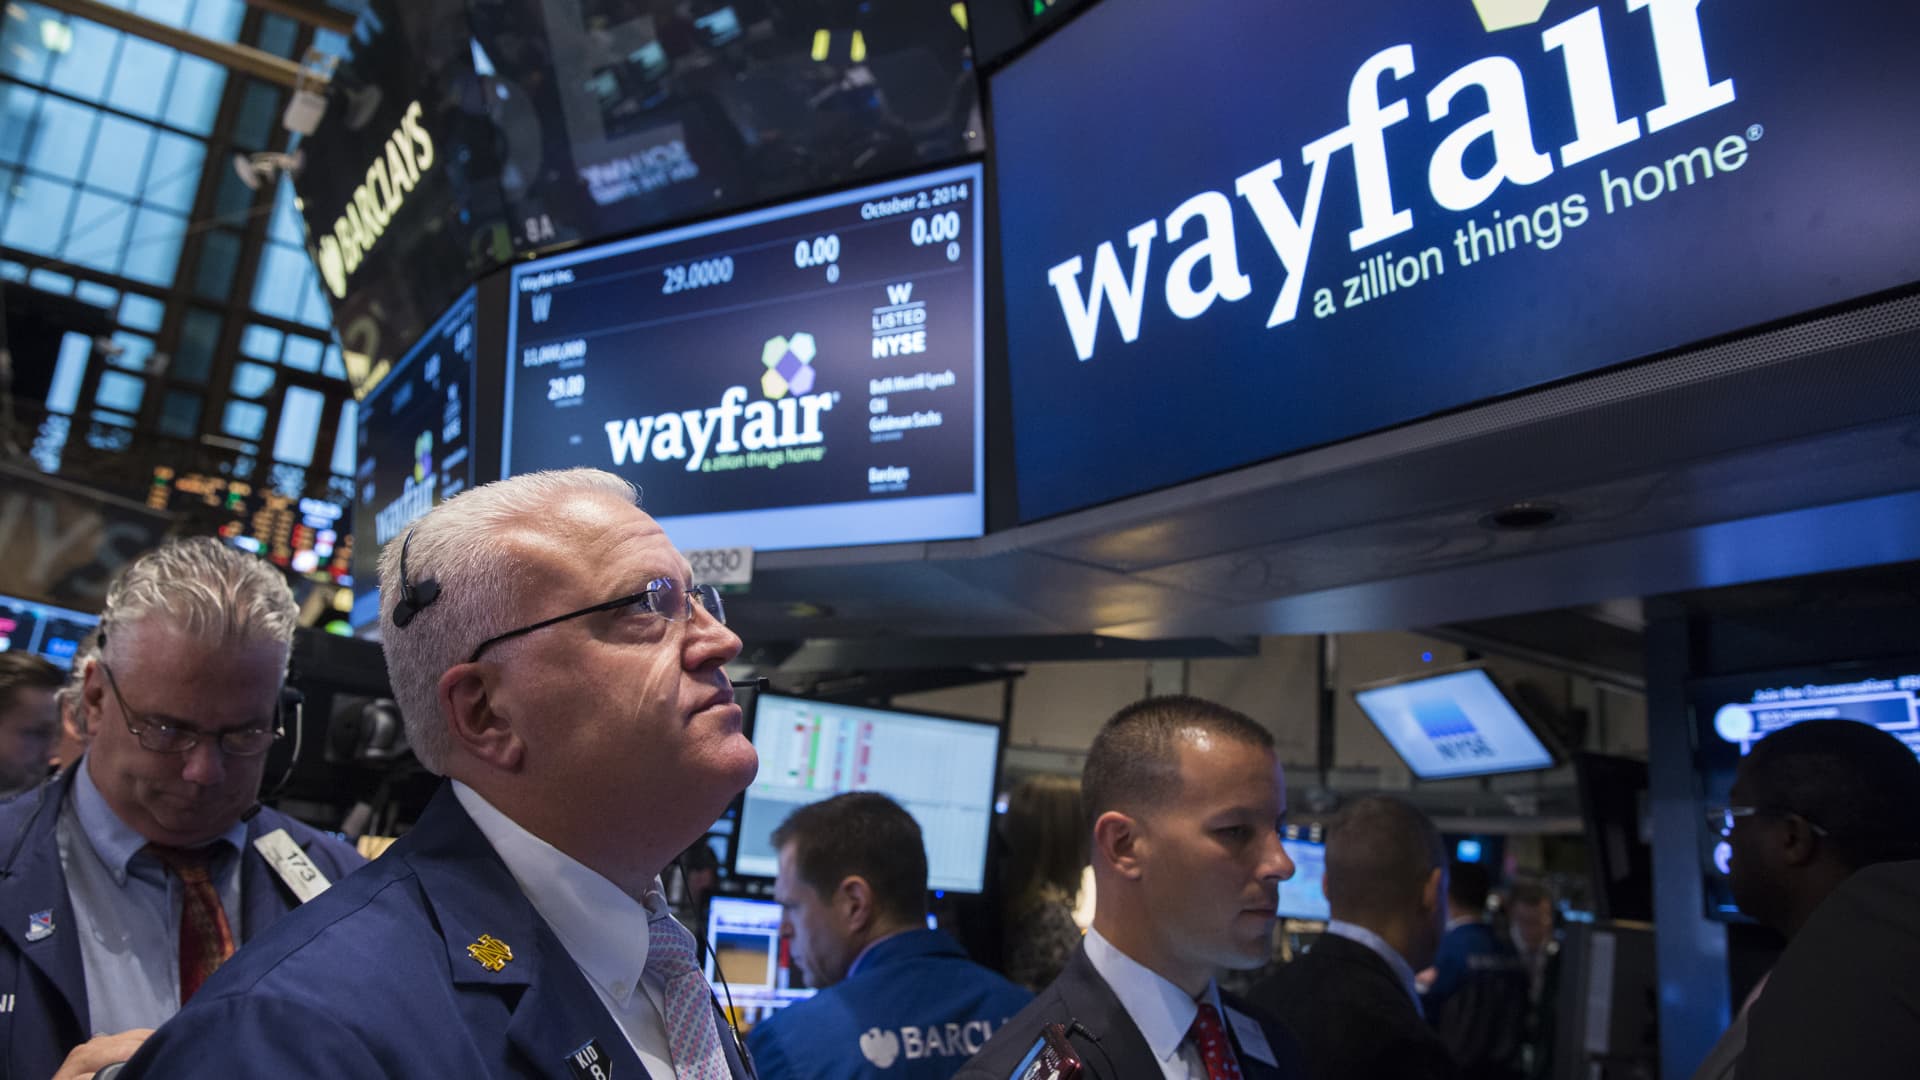 Wayfair's losses narrow by more than $100 million after layoffs, even as sales dip